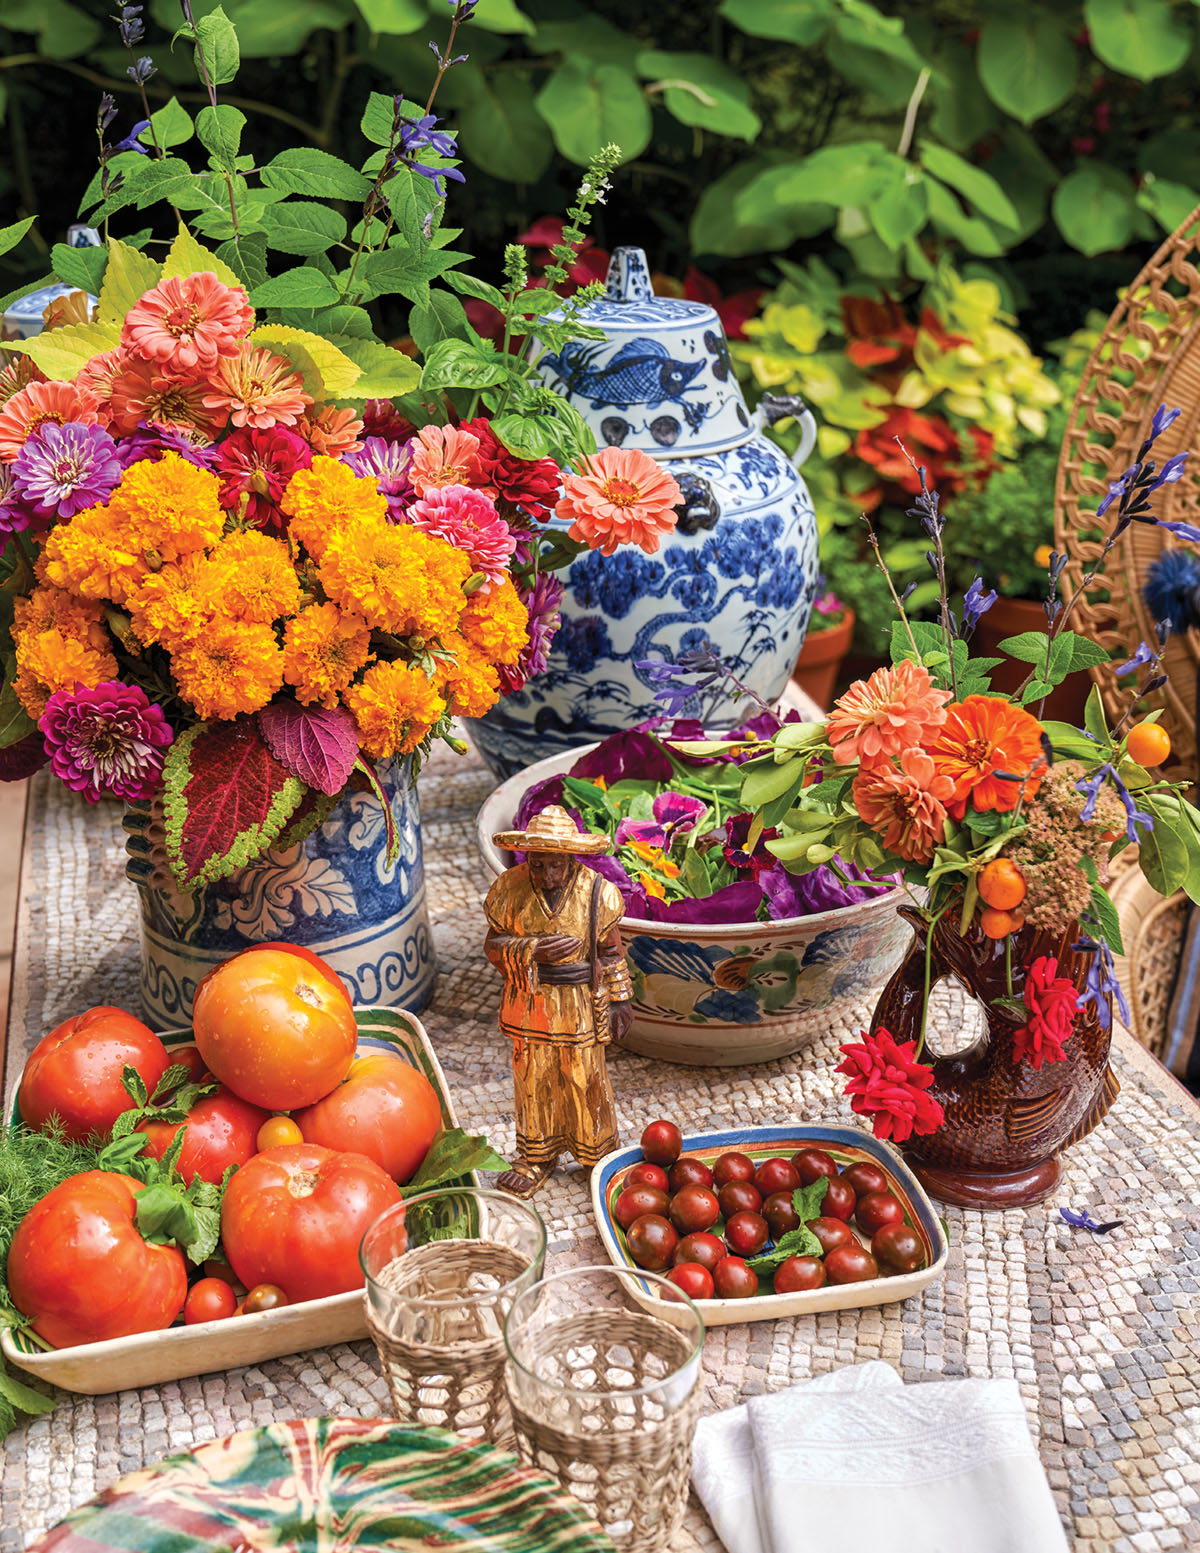 A blue-and-white ginger jar, a large salad, shallow bowls of summer tomatoes, and a pair of lush red and orange floral arrangement fill a mosaic patio table